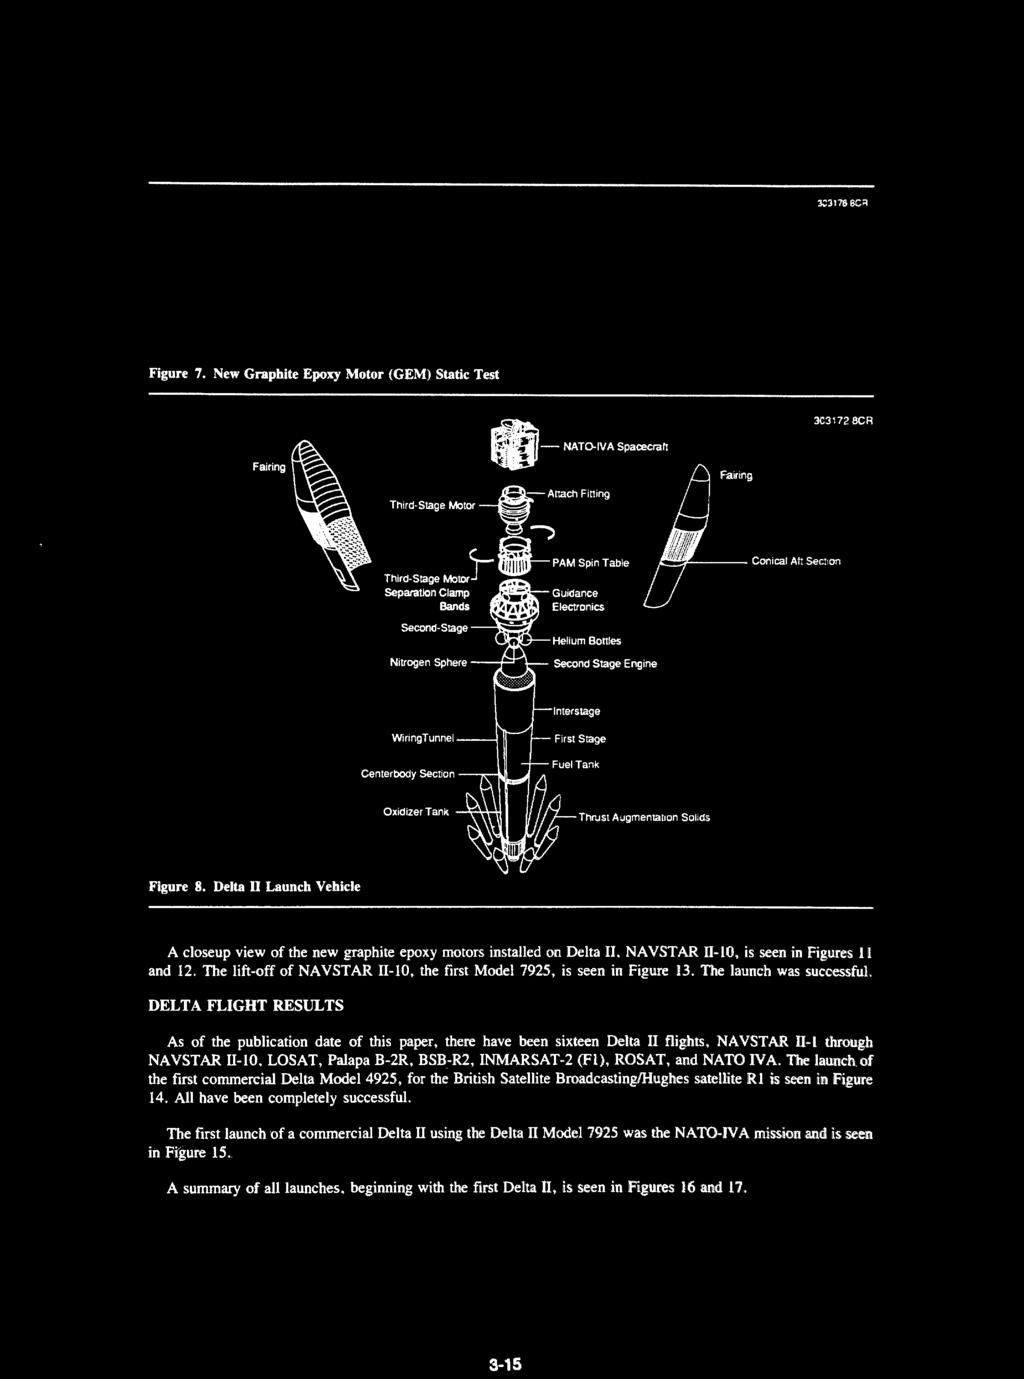 The lift-off of NAVSTAR 11-10, the first Model 7925, is seen in Figure 13, The launch was successful, DELTA FLIGHT RESULTS As of the publication date of this paper, there have been sixteen Delta II